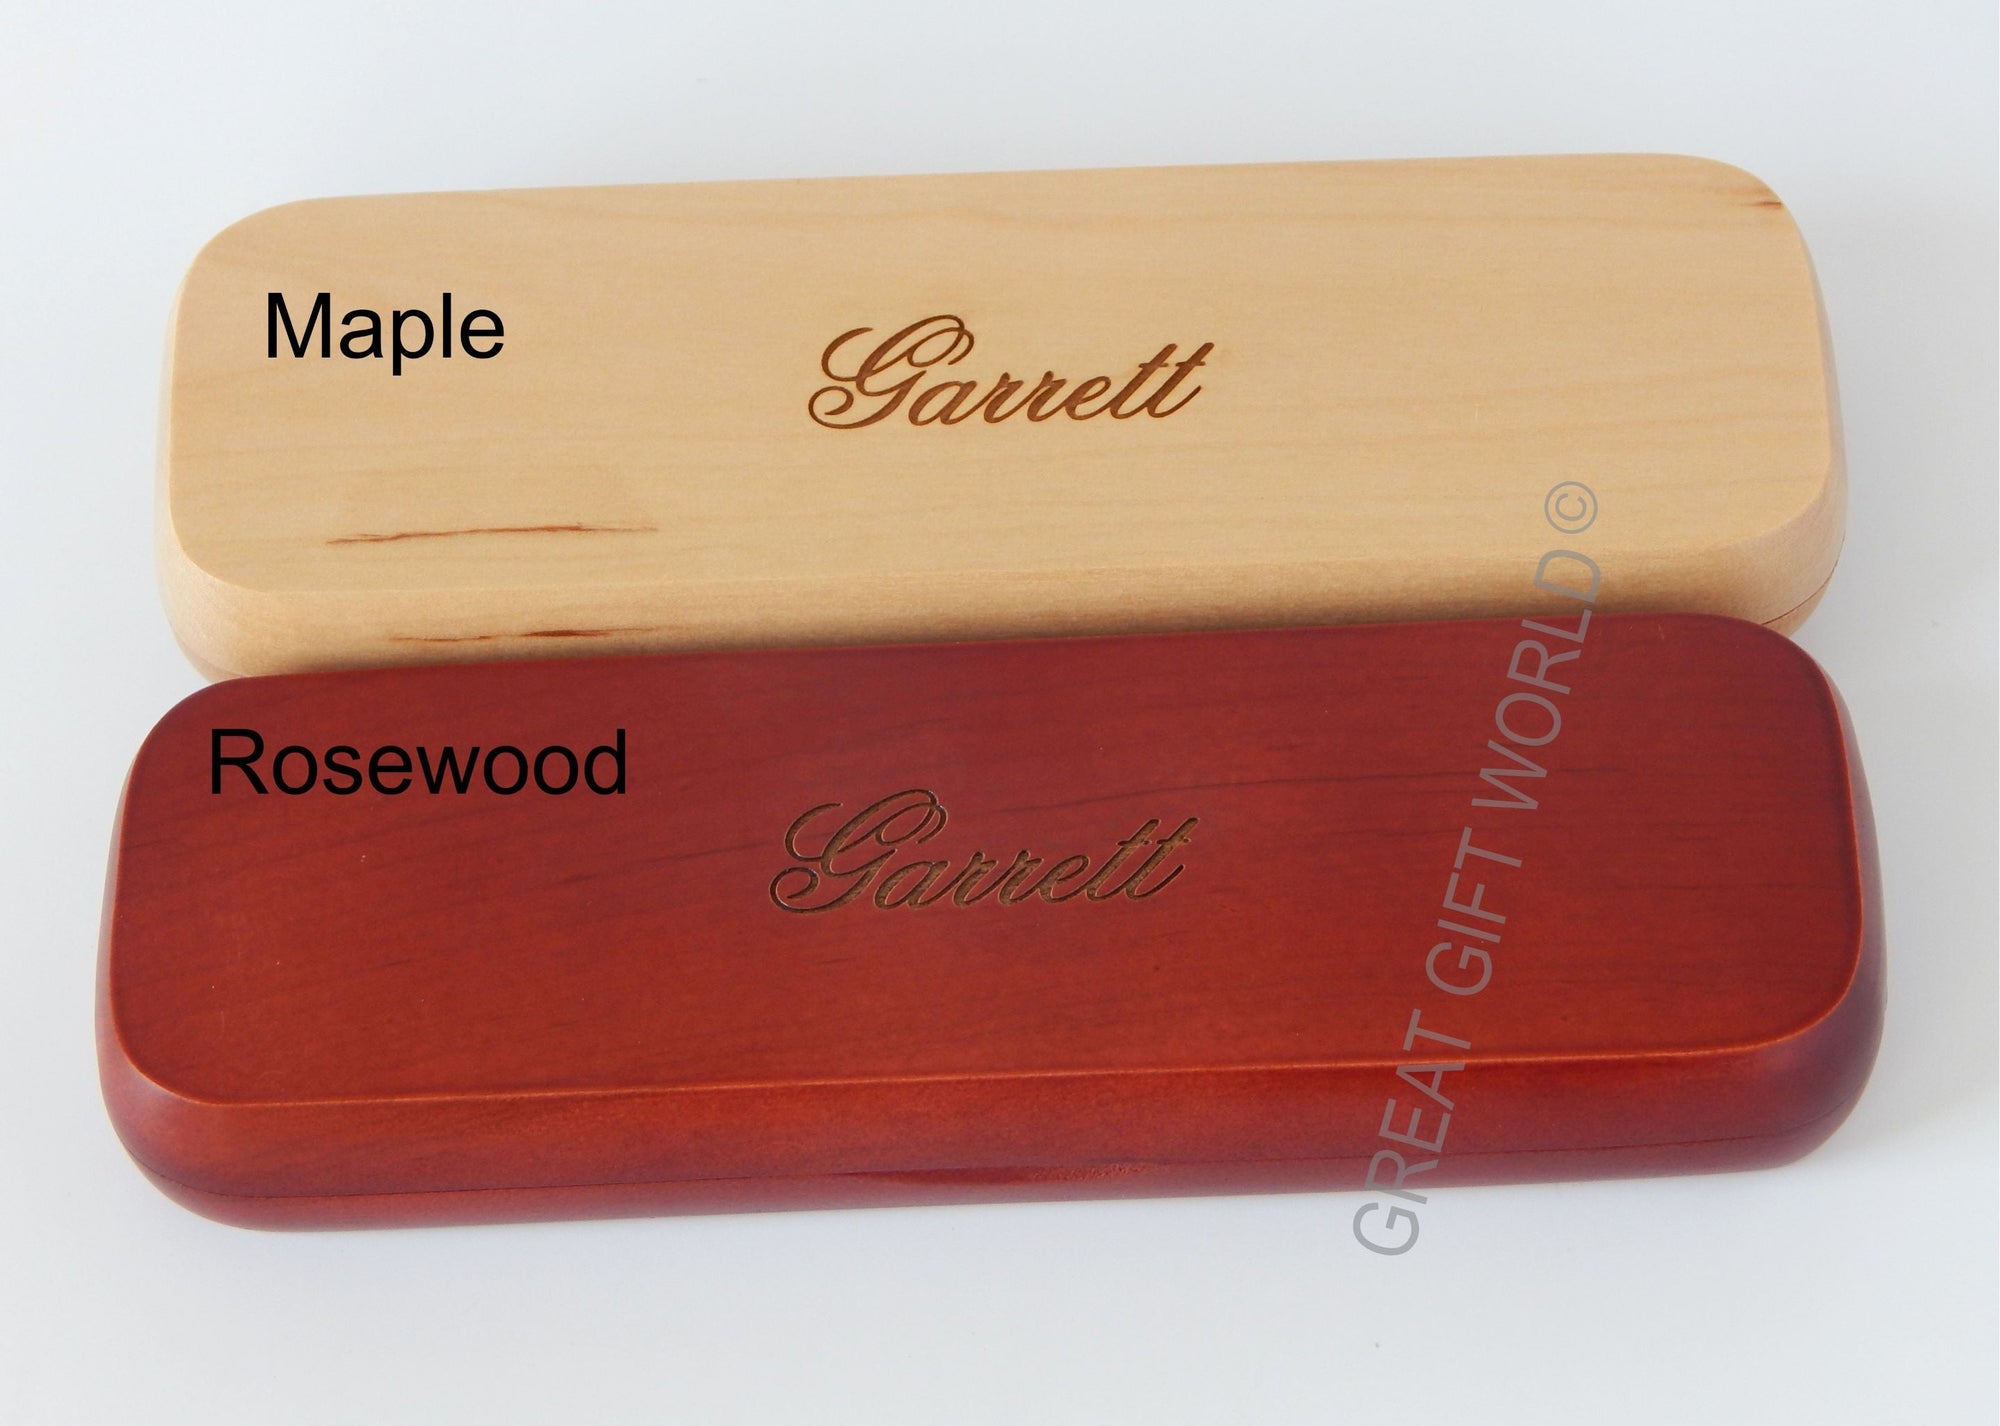 Best Grandpa Ever Gift | Personalized Wooden Pen